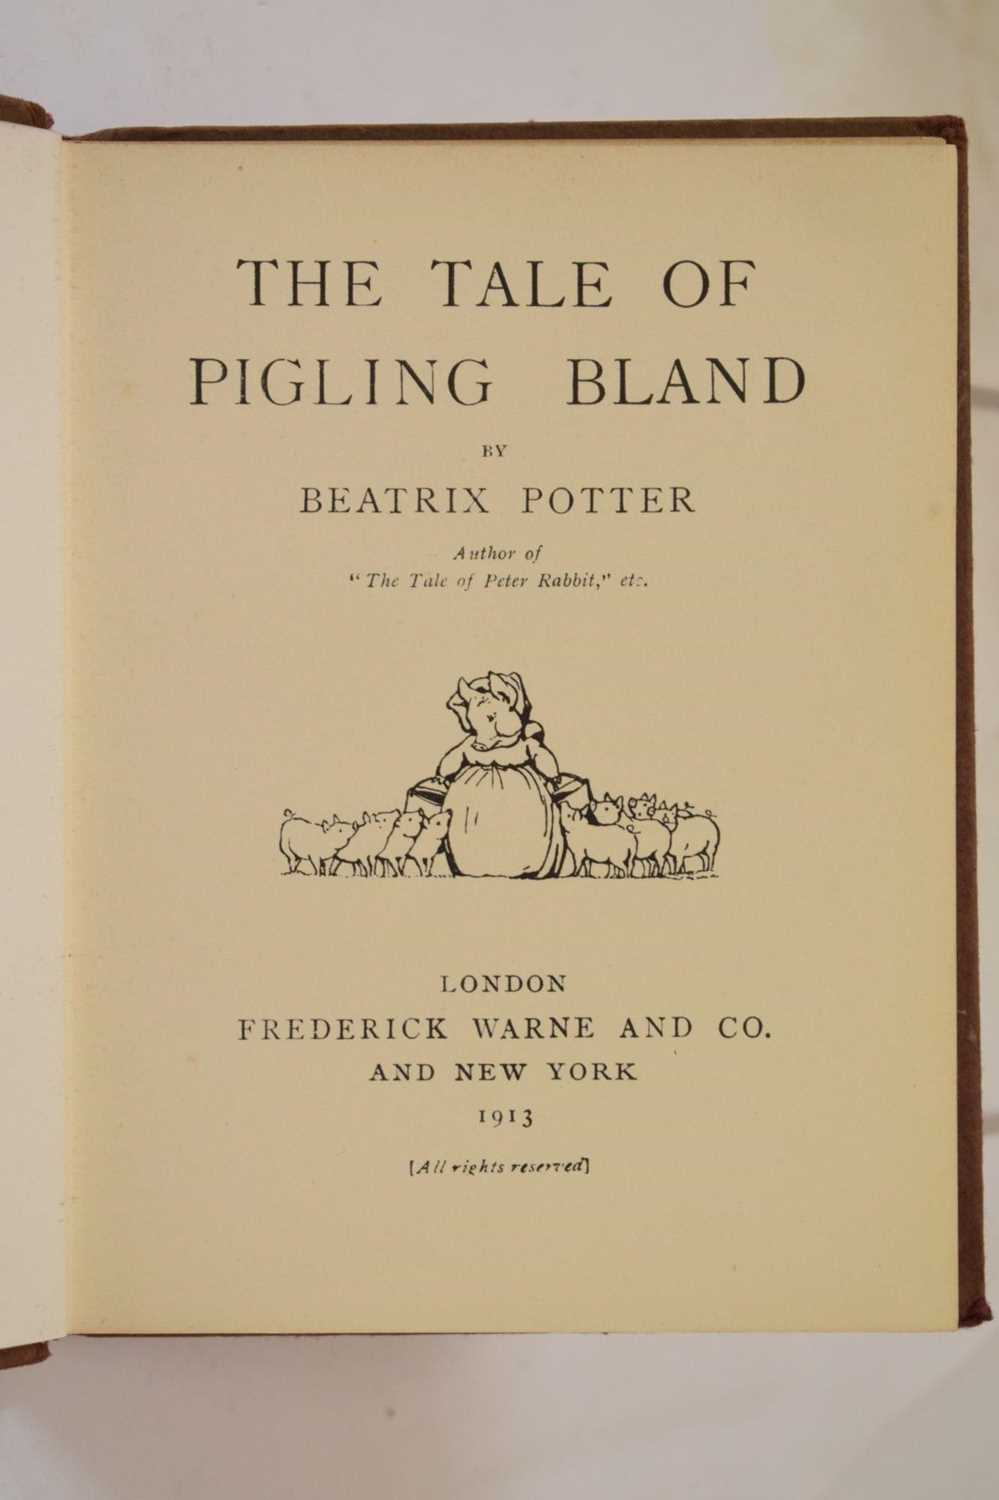 Potter, Beatrix - 'The Tale of Pigling Bland' - First edition 1913 - Image 16 of 19